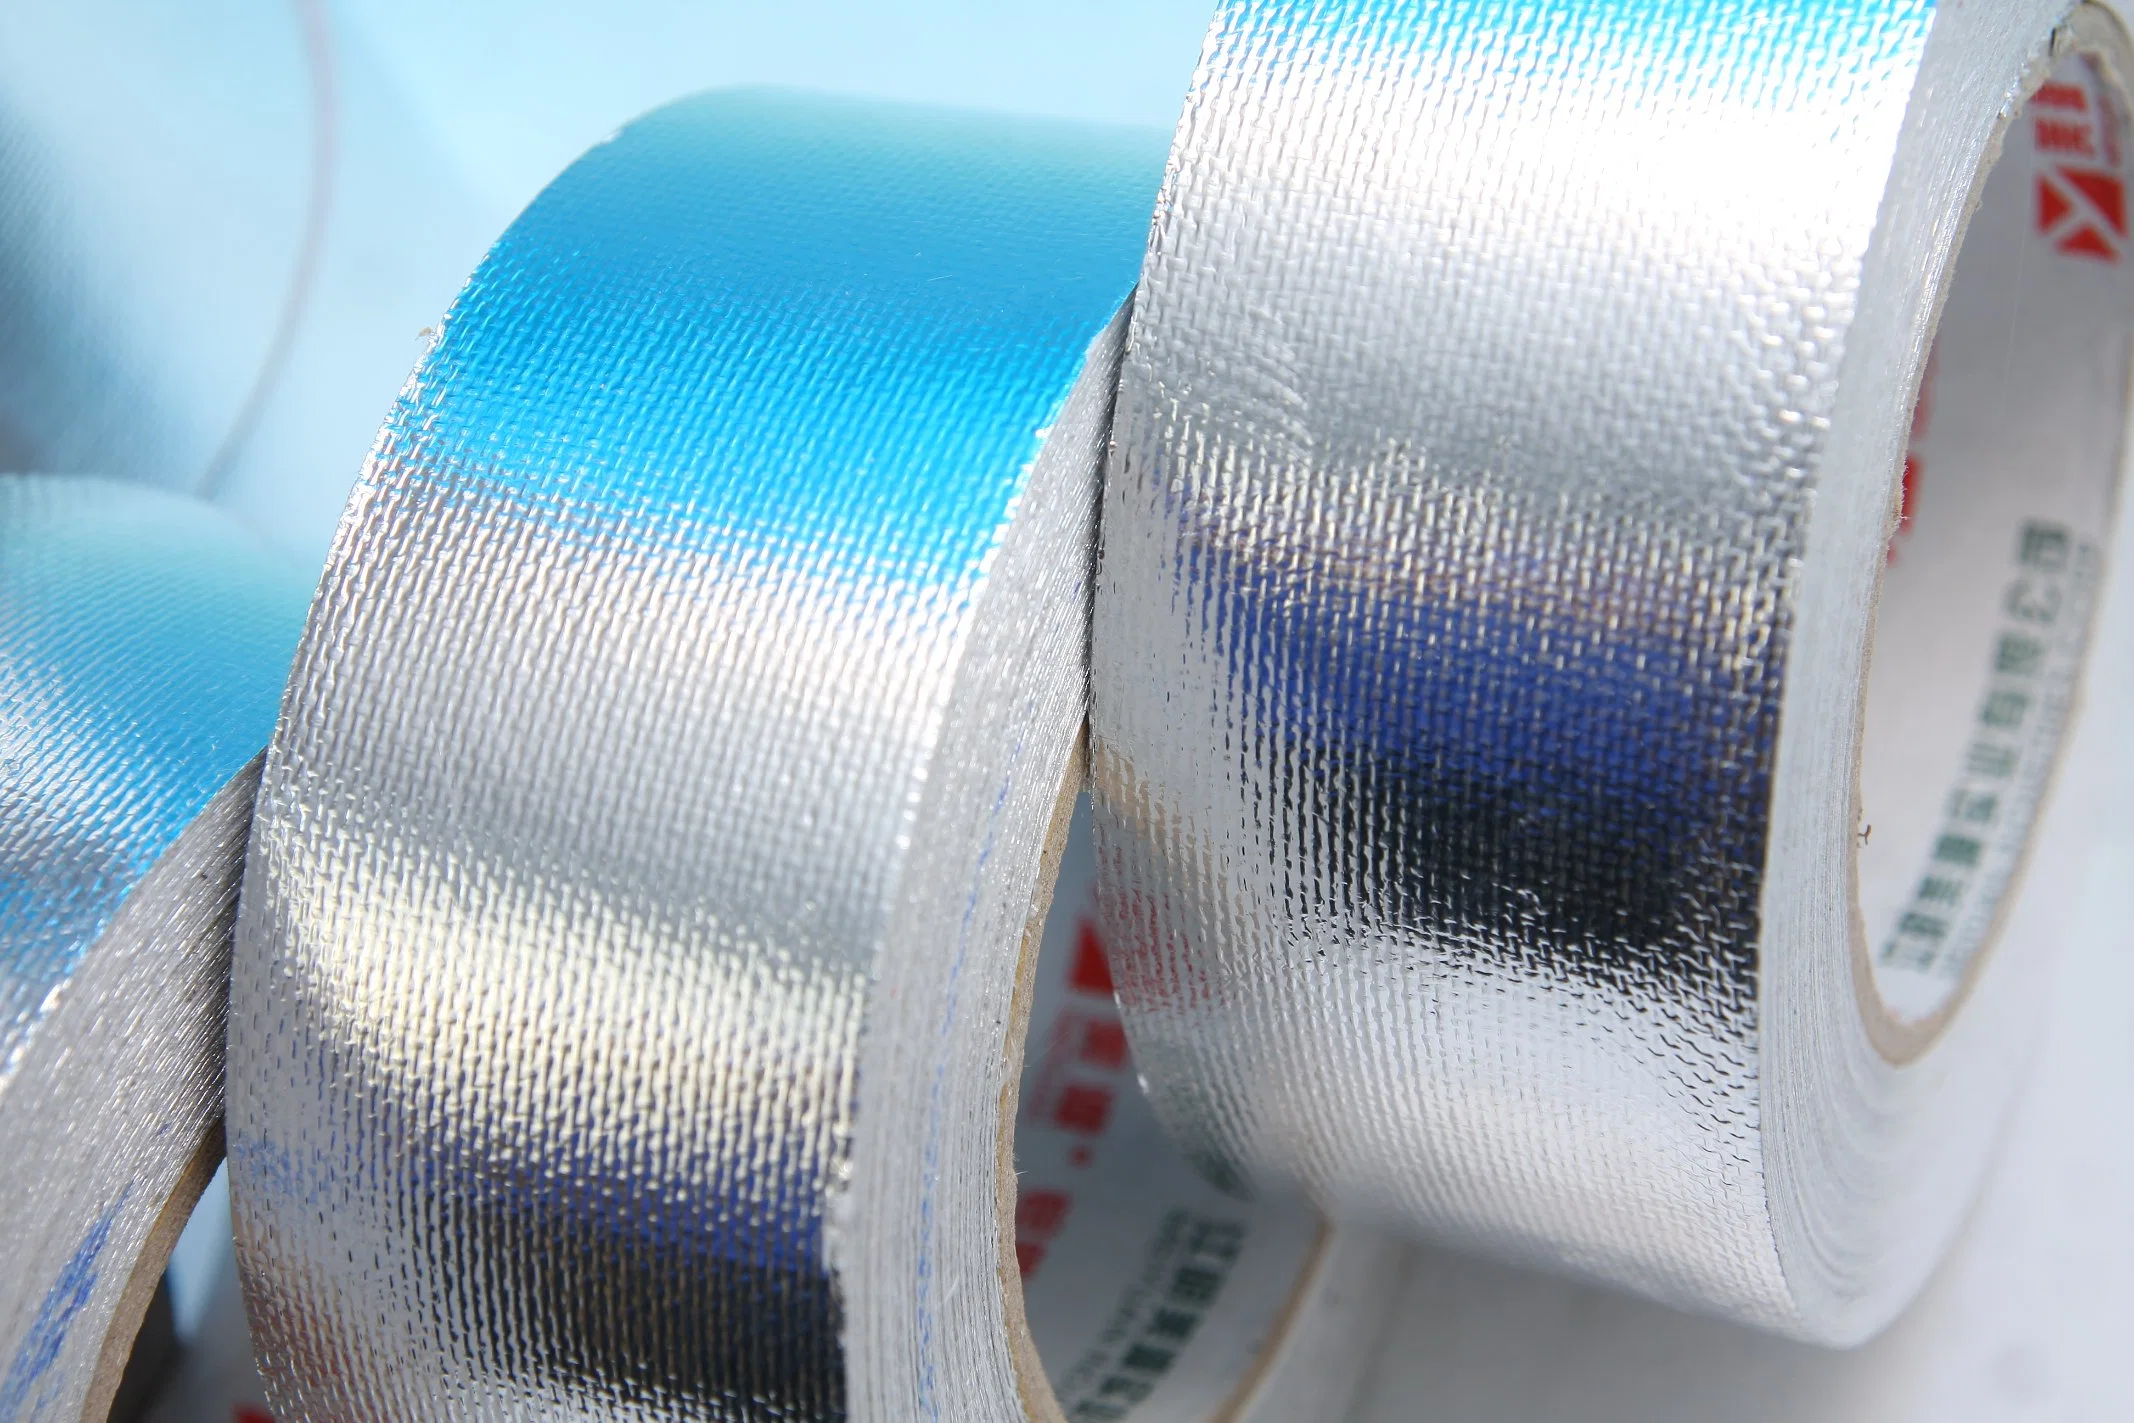 Meiyuan Corrosion Resistant Kitchen Use Aluminum Foil Adhesive Tape